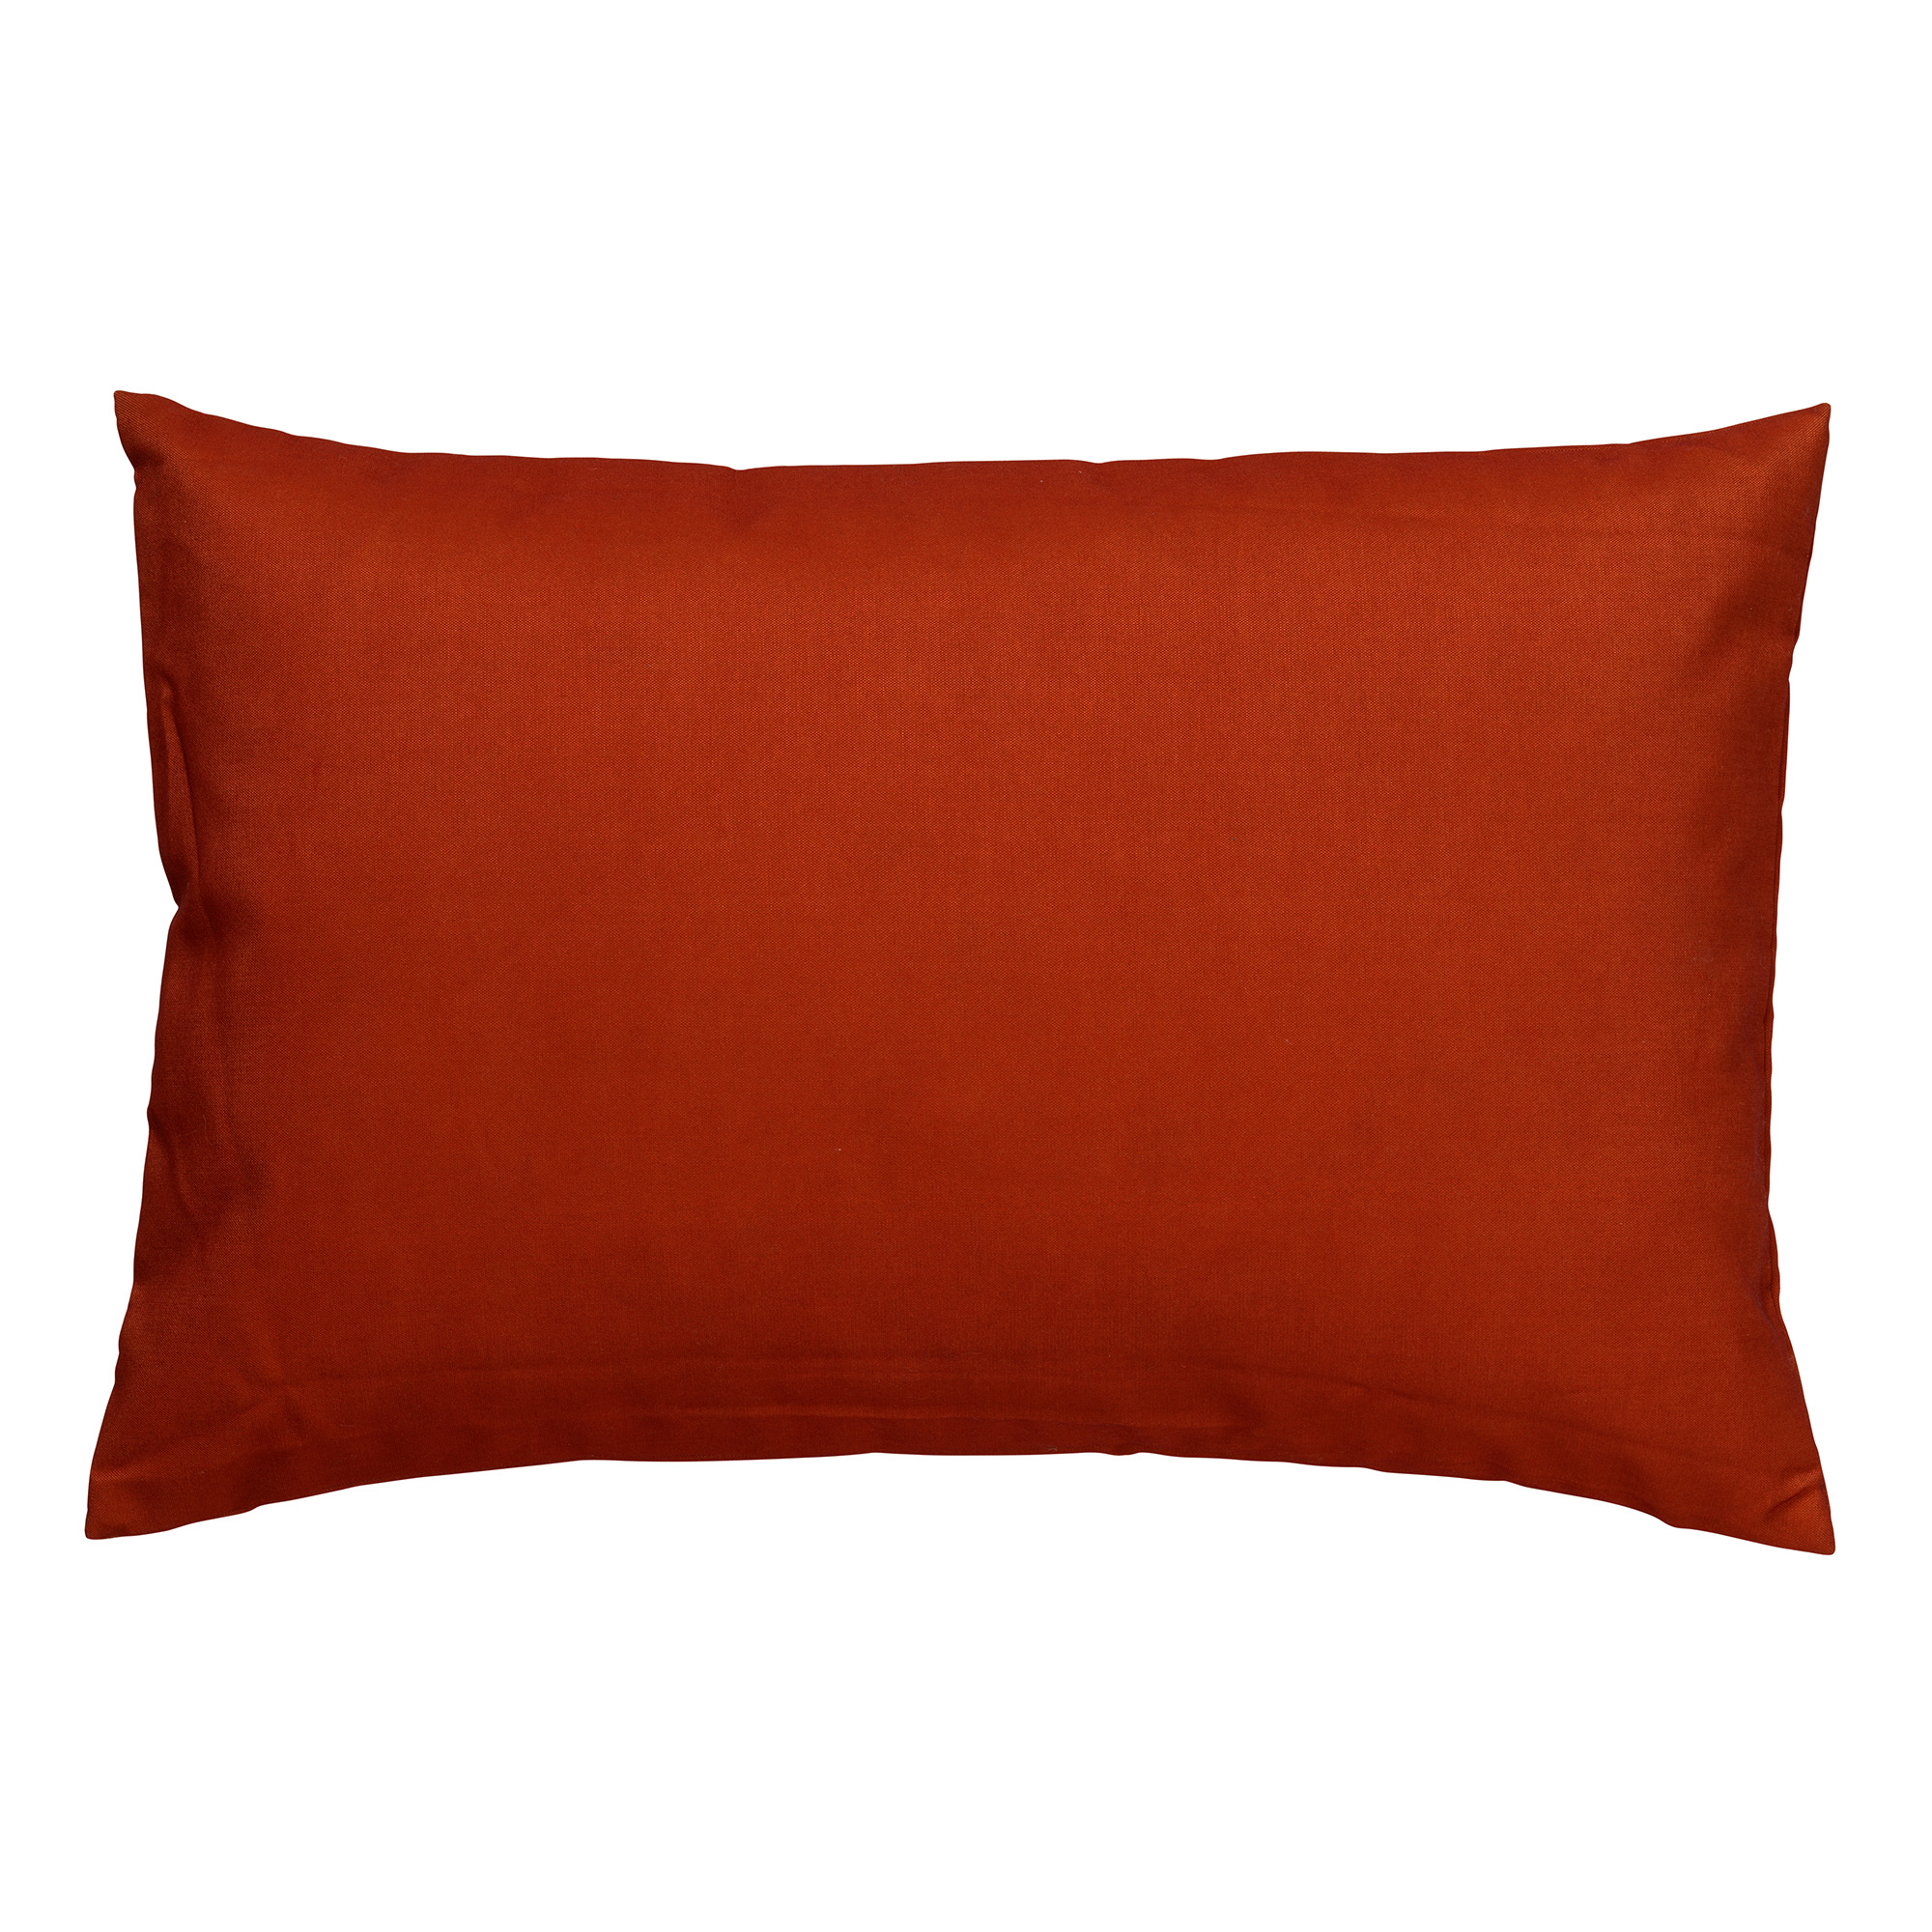 Cushion Santorini 40x60 cm Potters Clay - water-repellent and UV-resistant